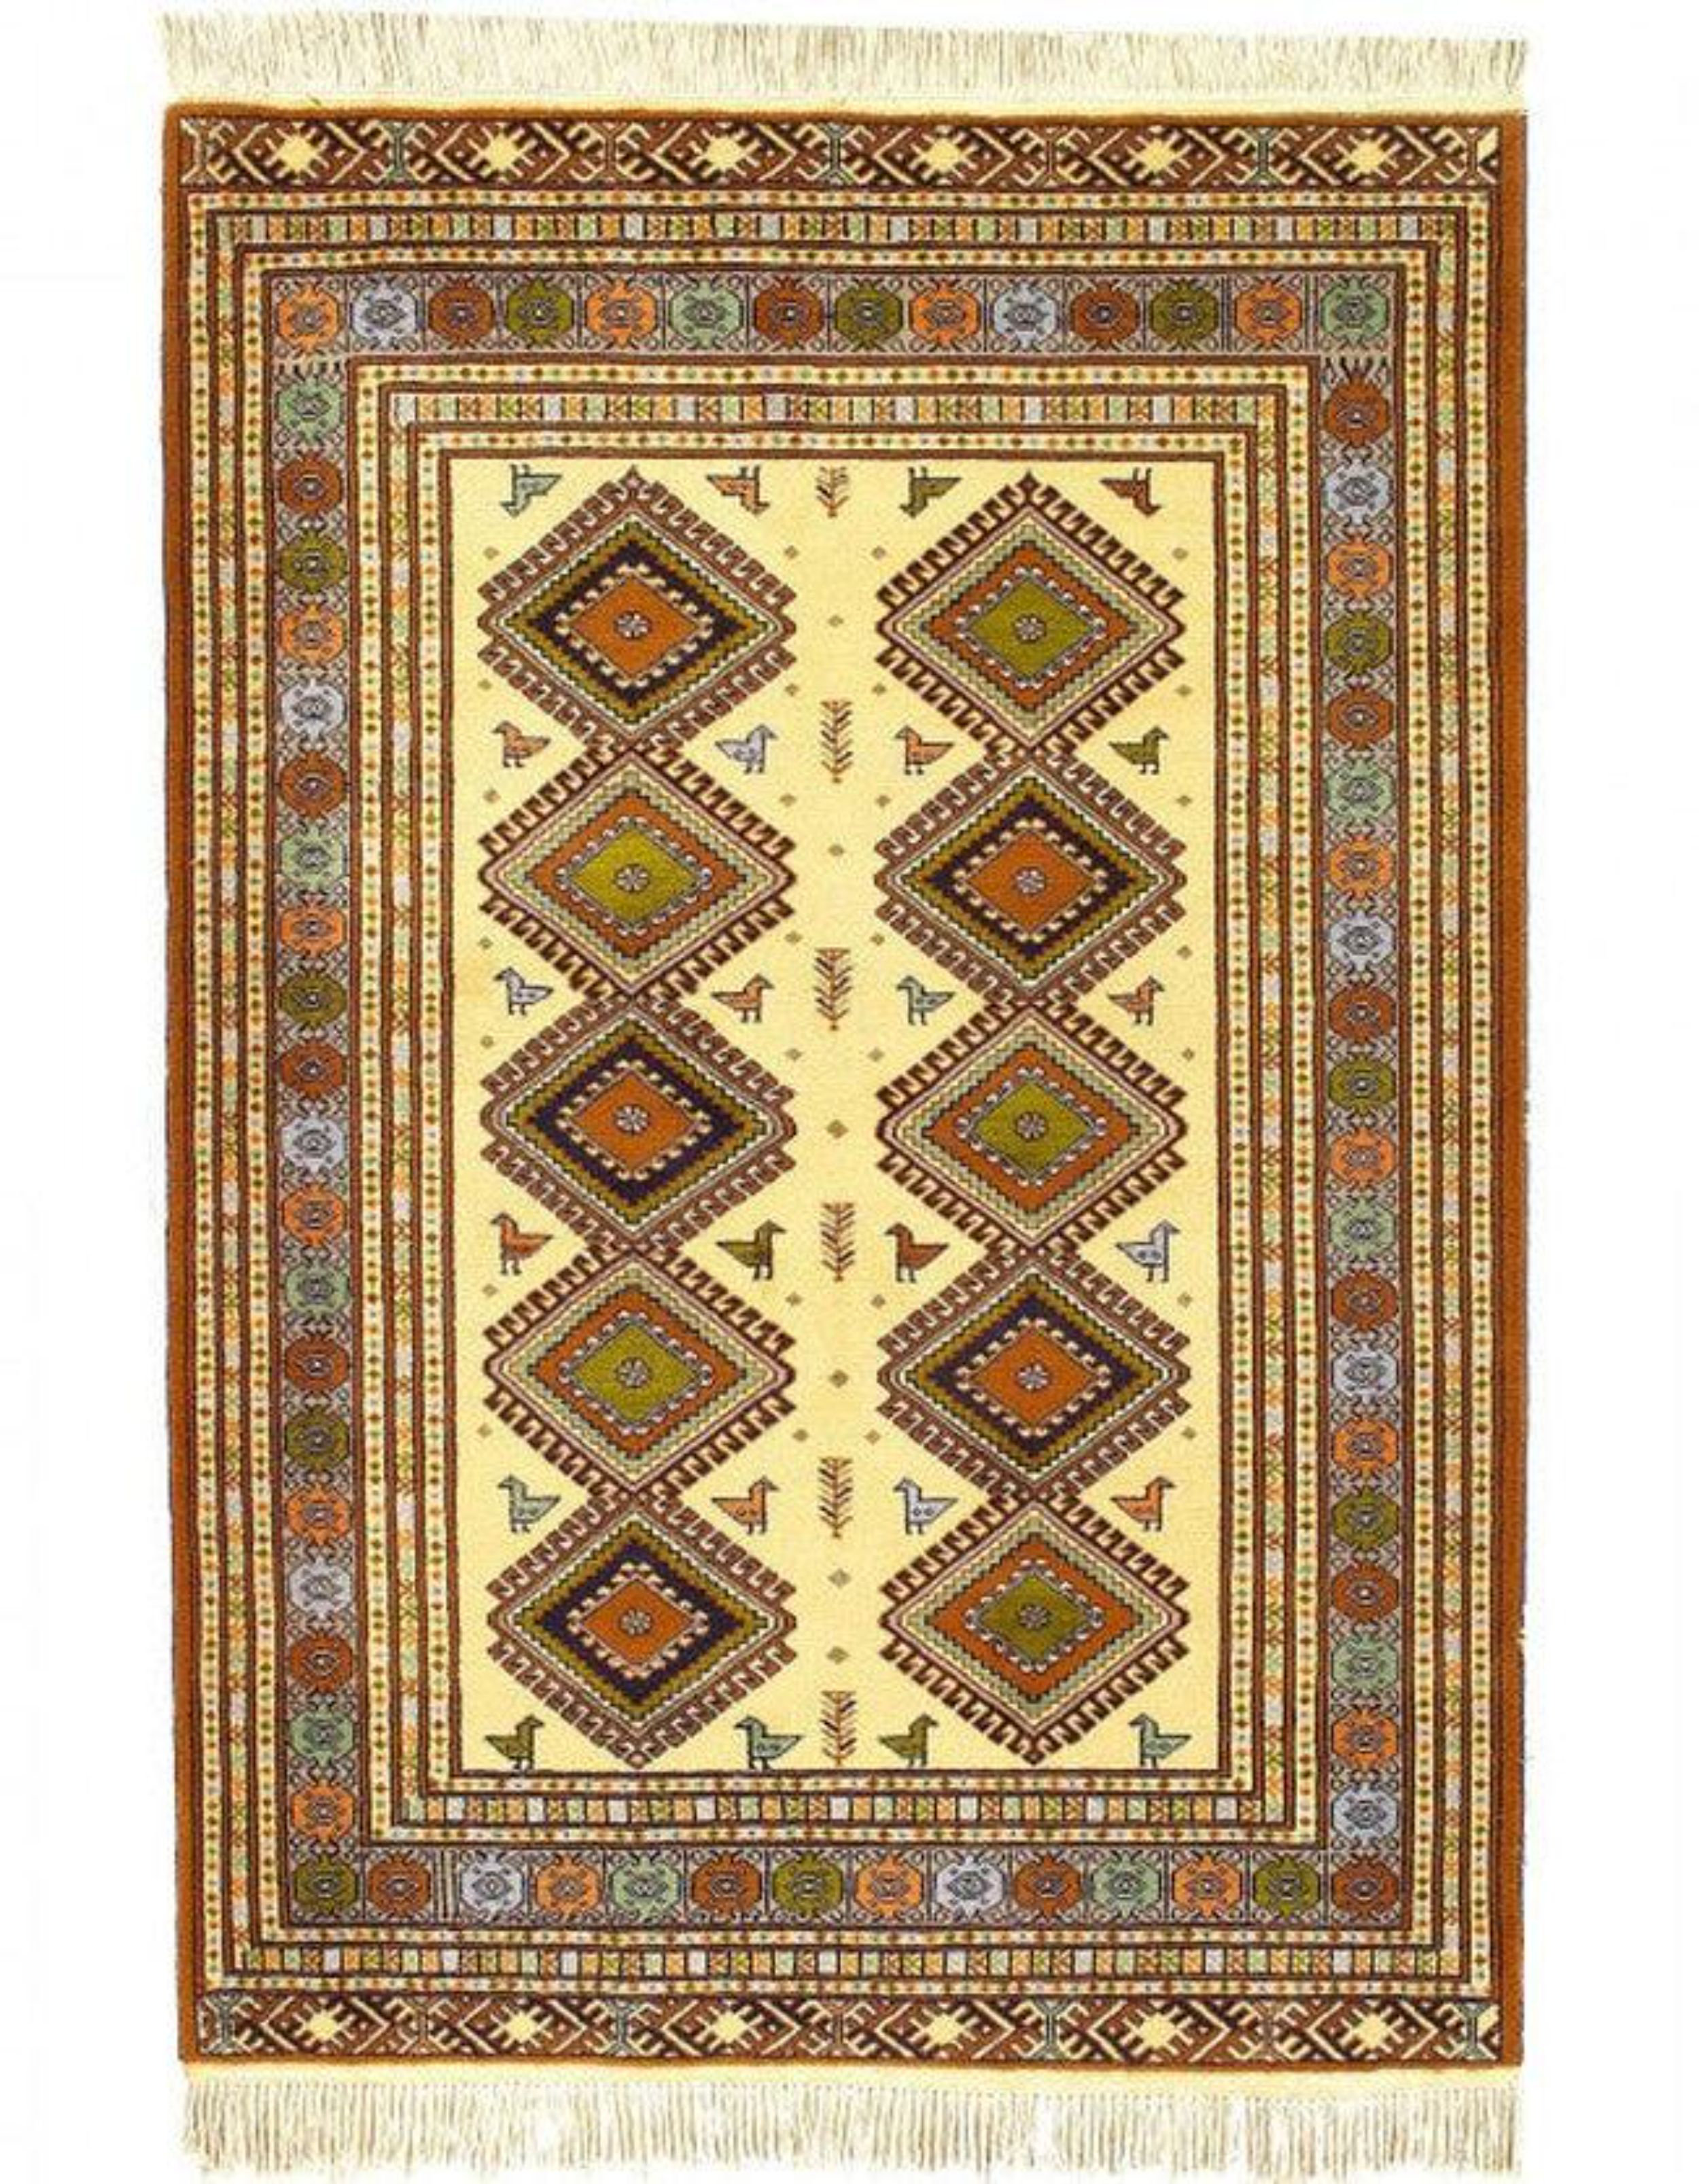 Isabelline Mathurn One-of-a-Kind 3'4 X 3'4 Round Area Rug in